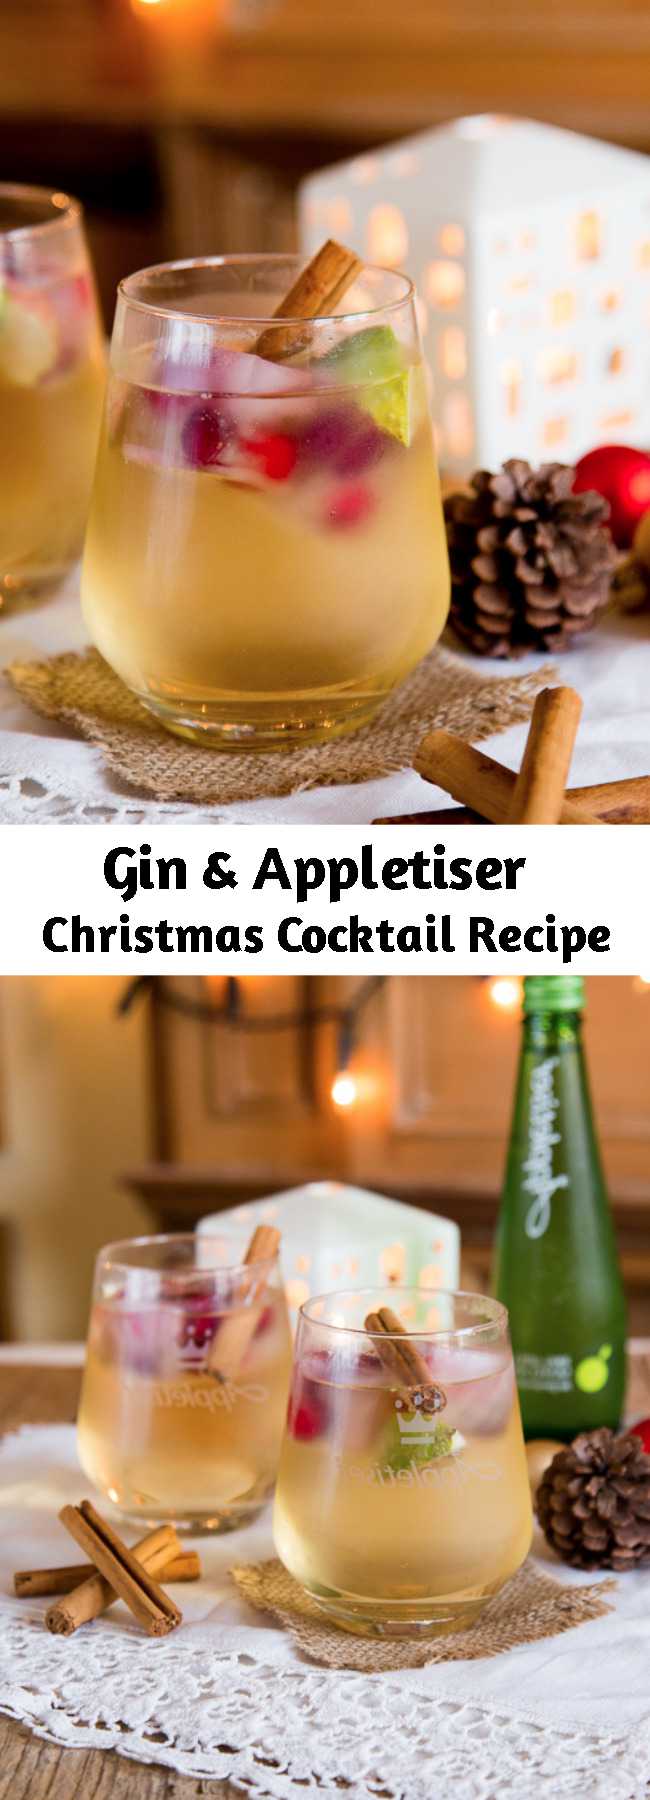 Gin & Appletiser Christmas Cocktail Recipe - A fruity twist on a gin & tonic, this long refreshing cocktail is lightly spiced and perfect for a Christmas party. Easy to make and serve over ice. Take out the cinnamon stick and serve it in the summer too!